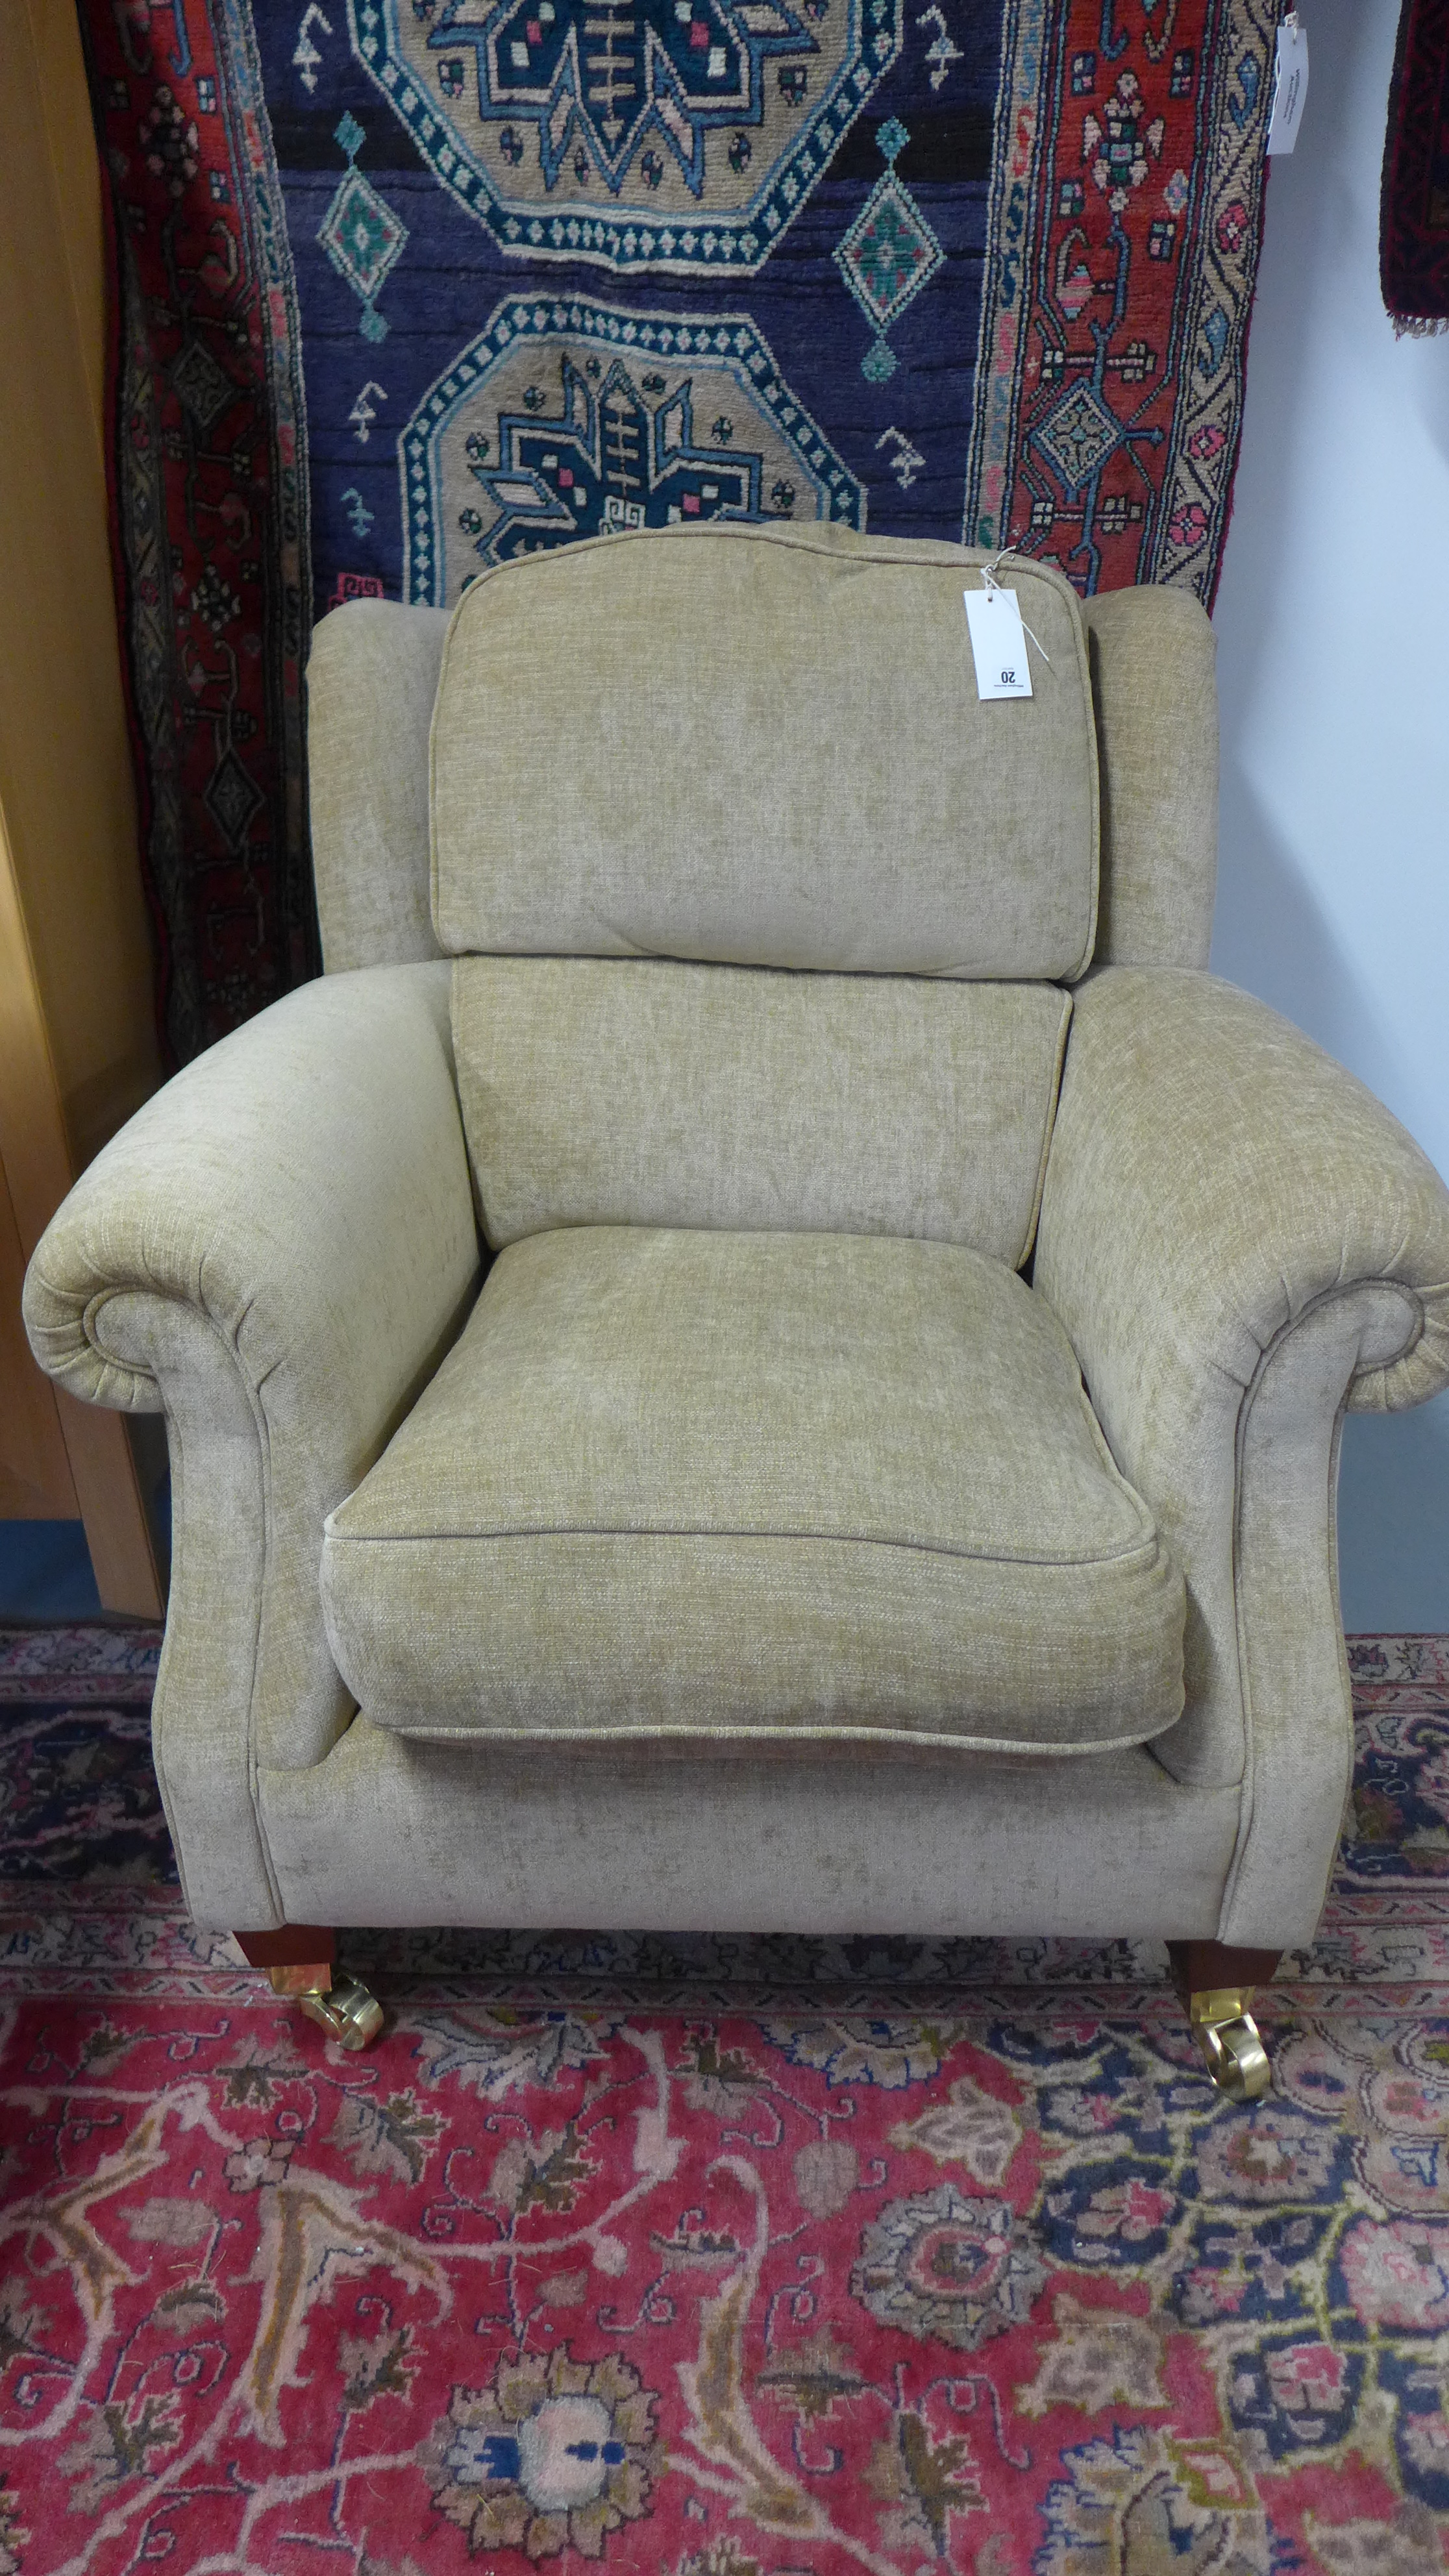 A Parker Knoll armchair with arm protectors - as new - cost £850 new